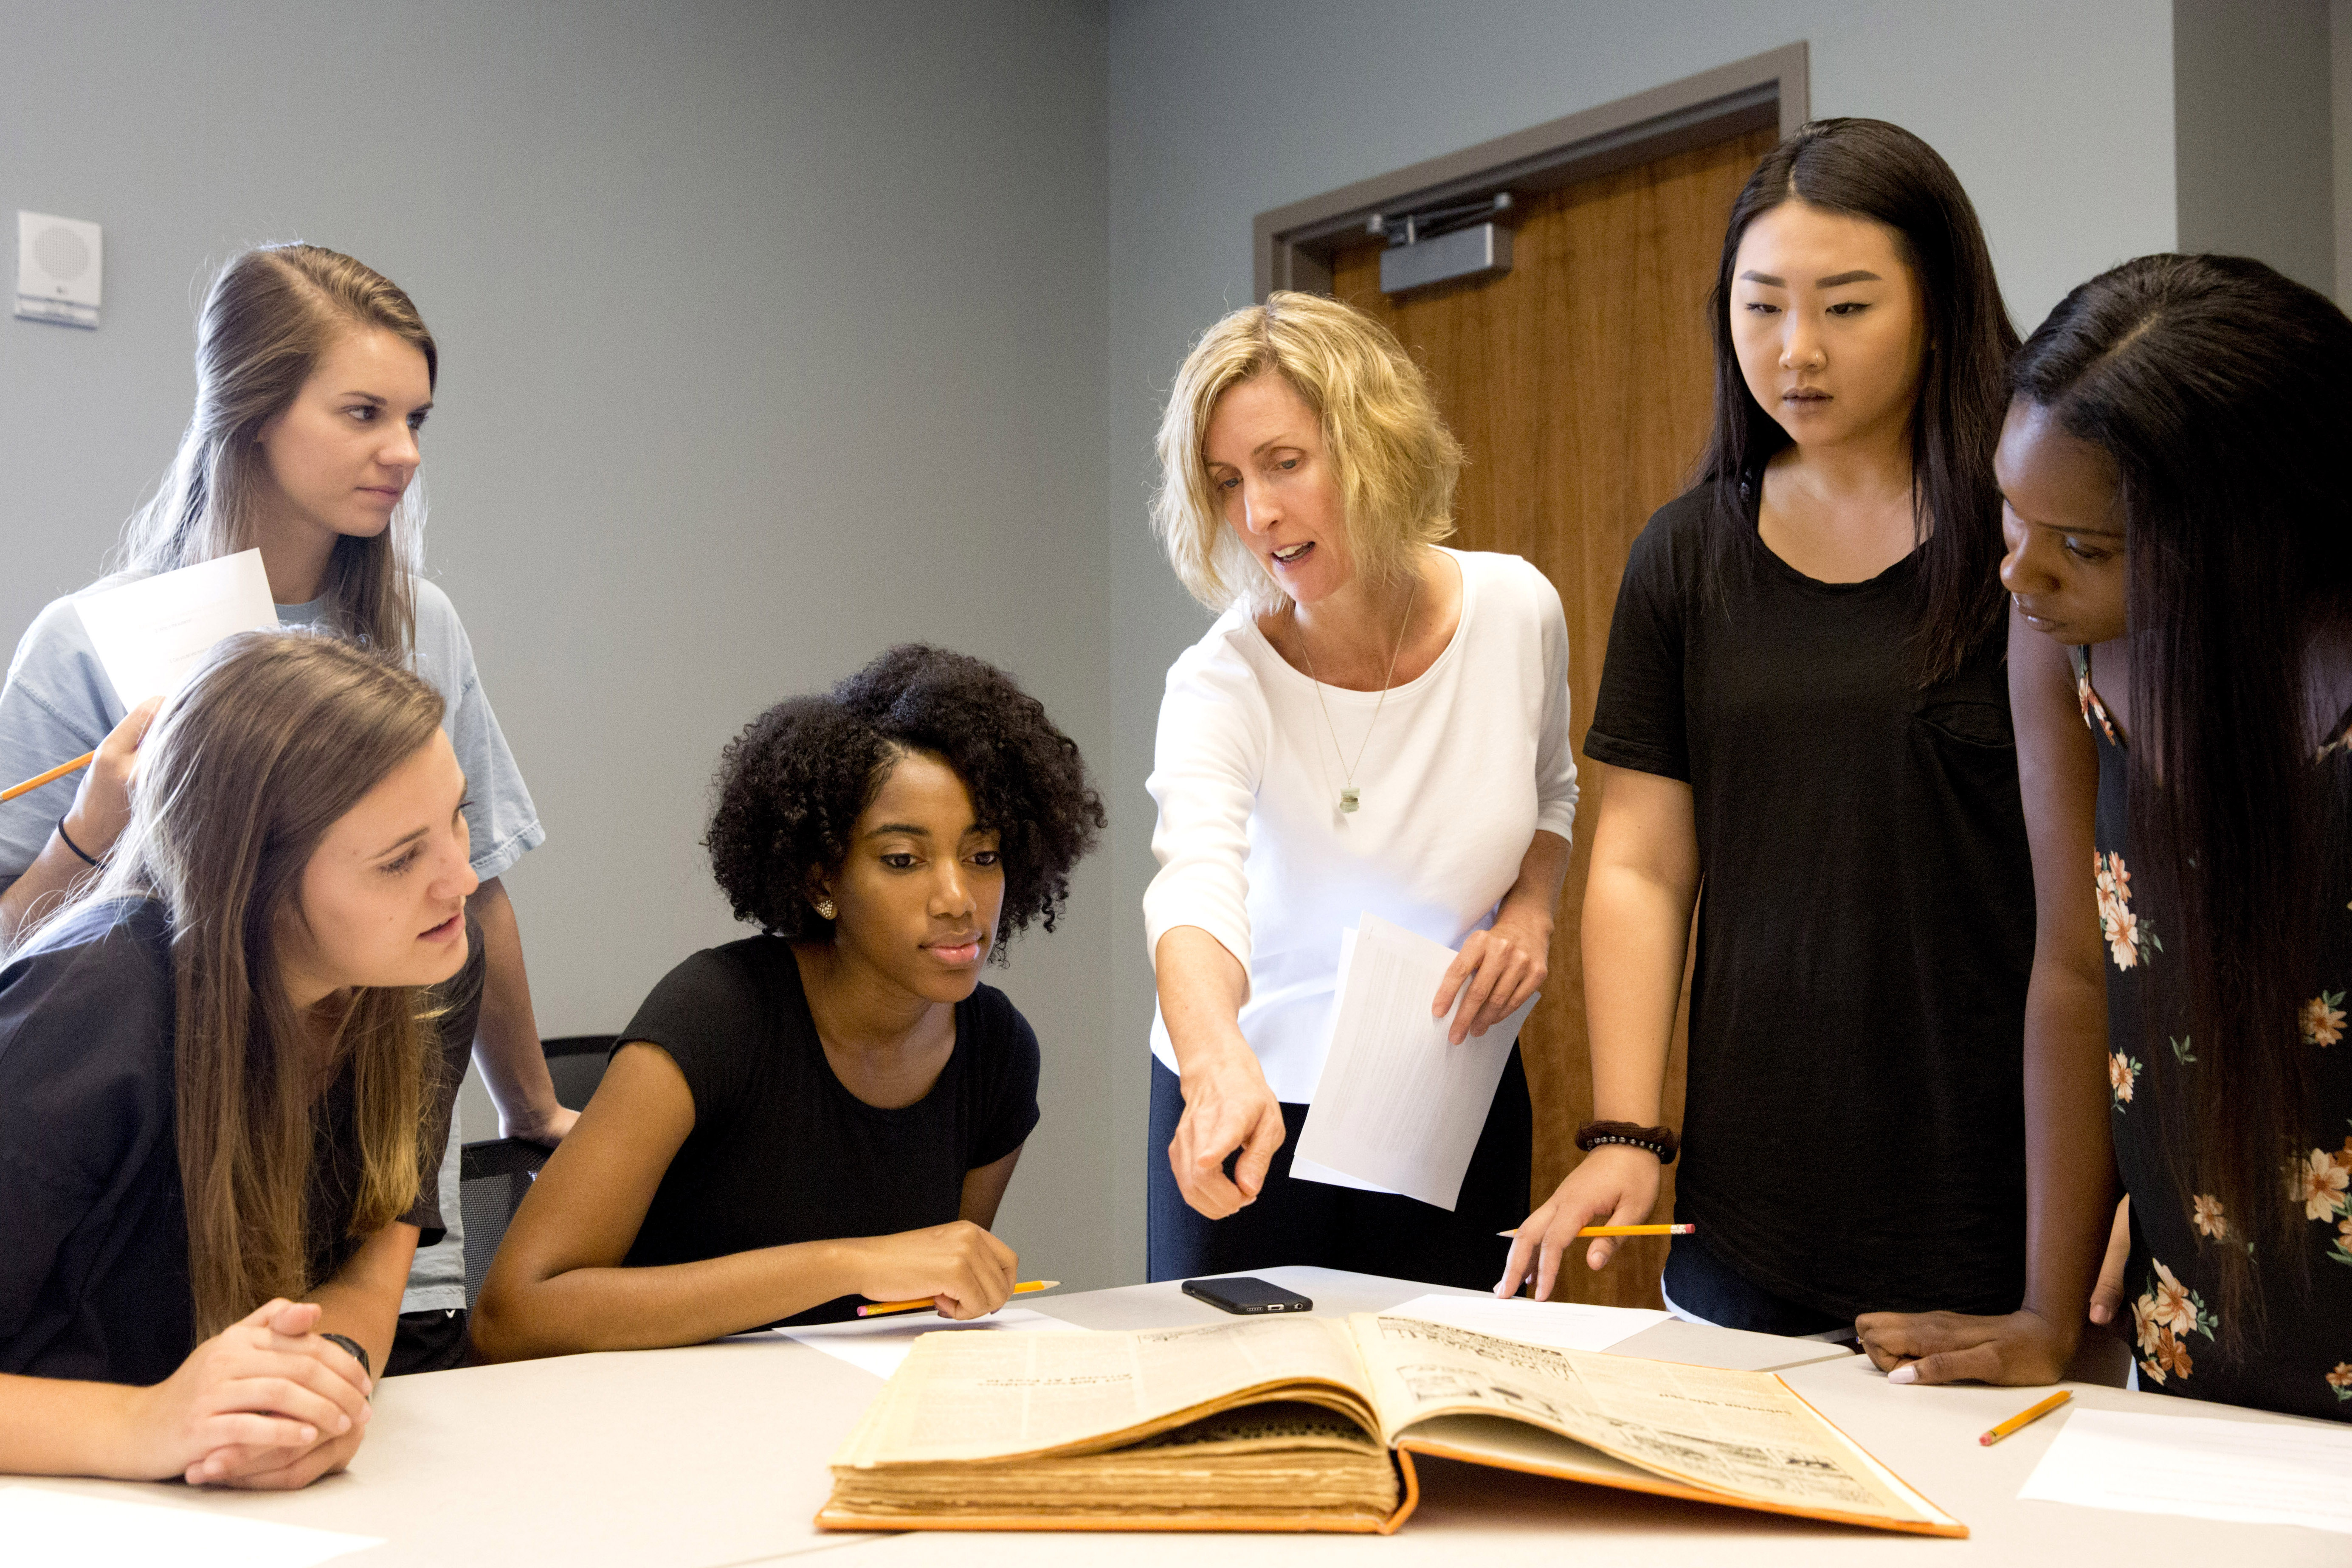 female faculty member and students looking at a book